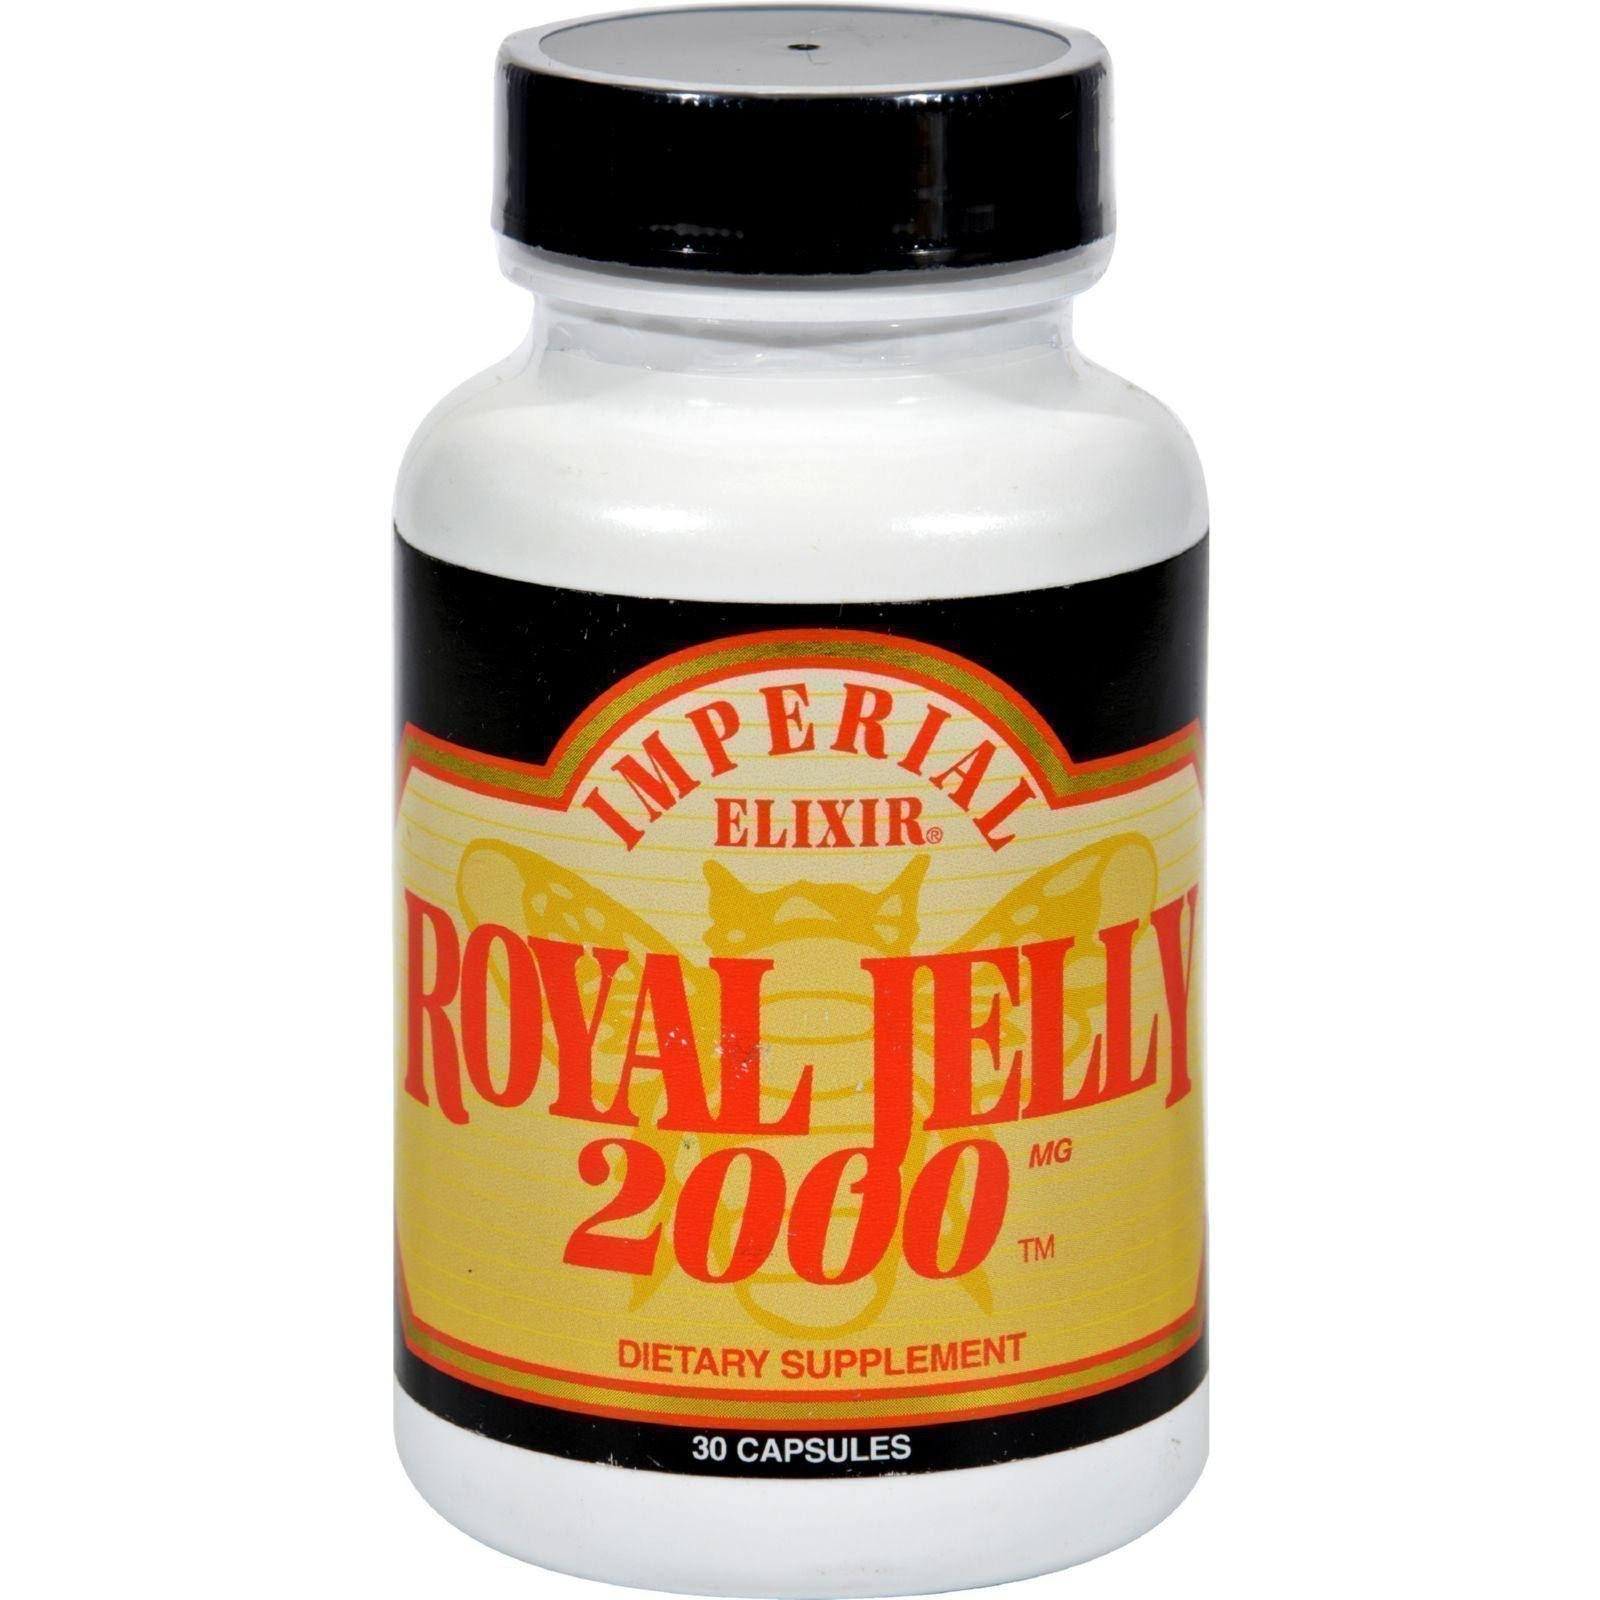 Imperial Elixir Royal Jelly Supplement - 2000mg, 30ct